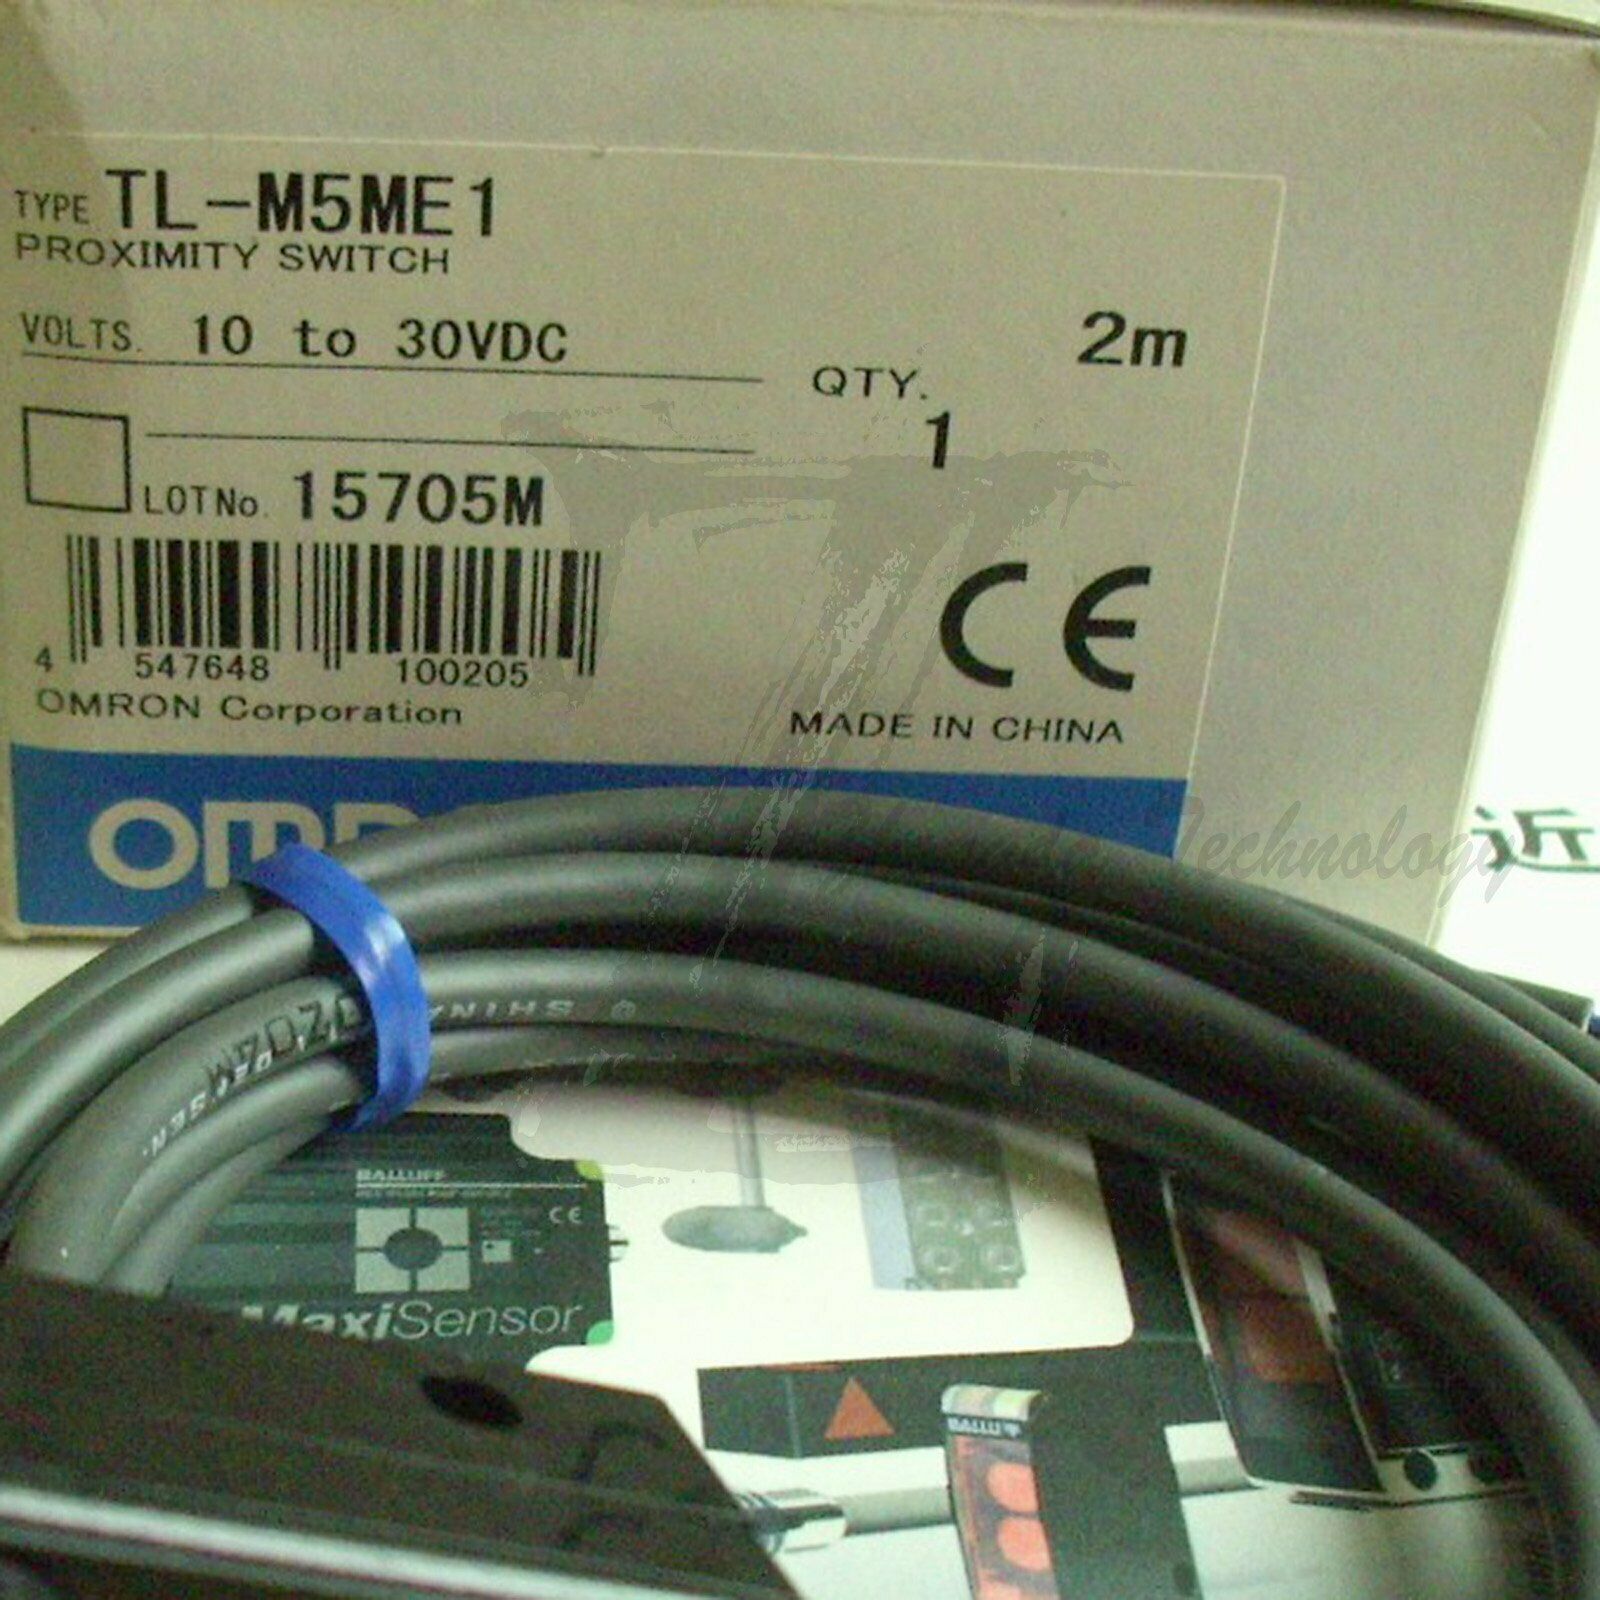 NEW Omron proximity switch TL-M5ME1 Quality assurance